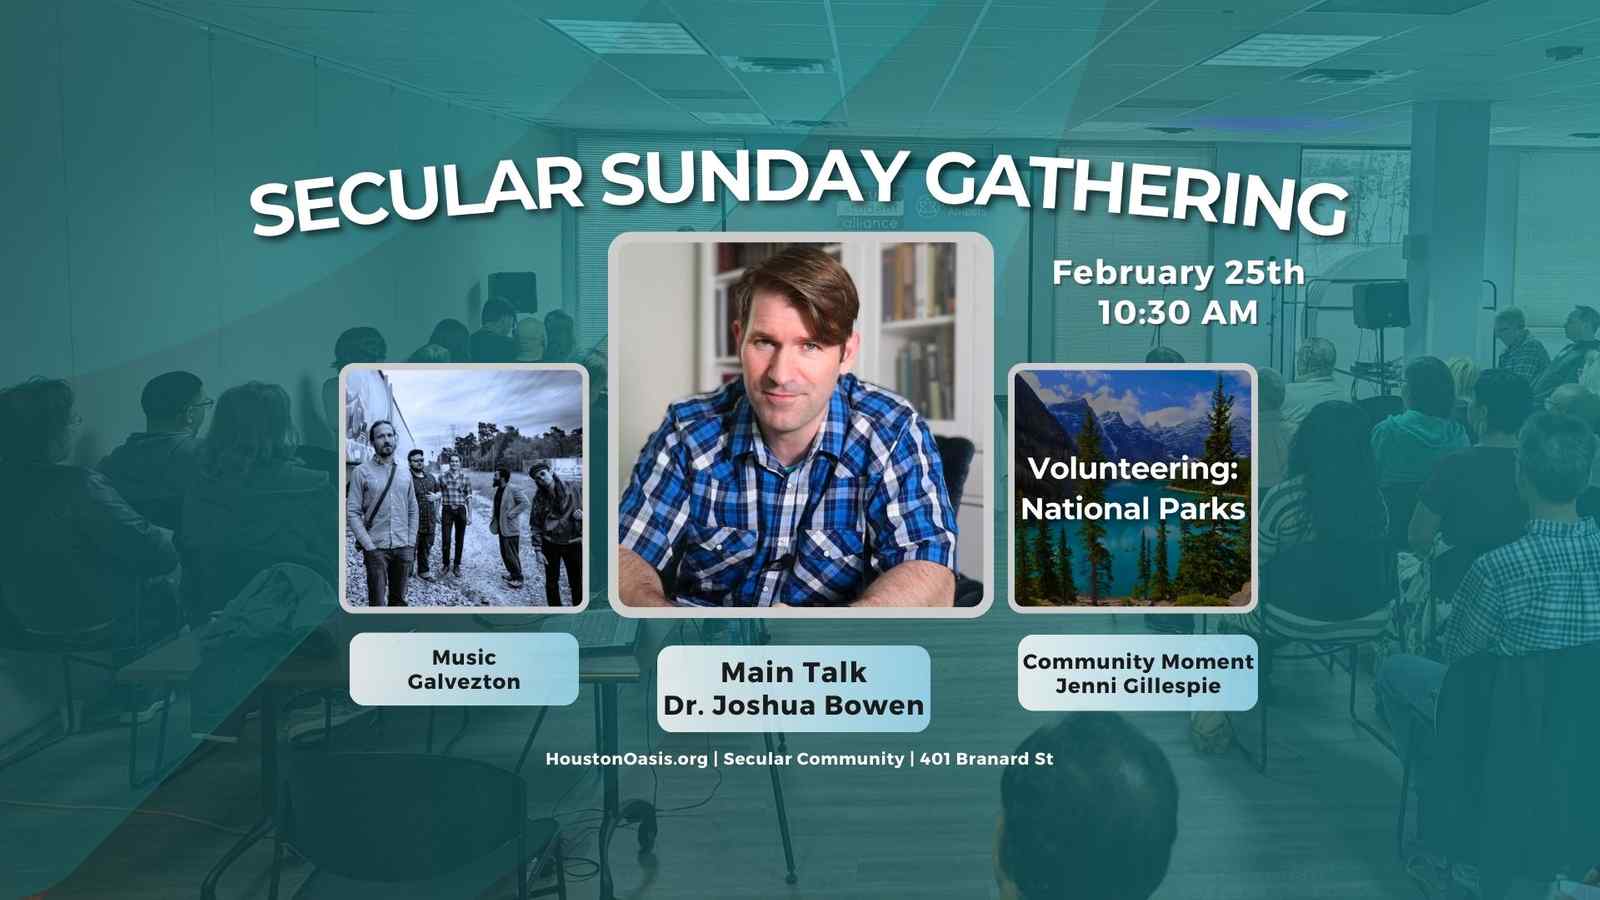 "Your Eye Shall Have No Pity": Old Testament Violence and Modern Evangelical Morality | Dr. Joshua Bowen | Music: Galvezton | Weekly Sunday Gathering